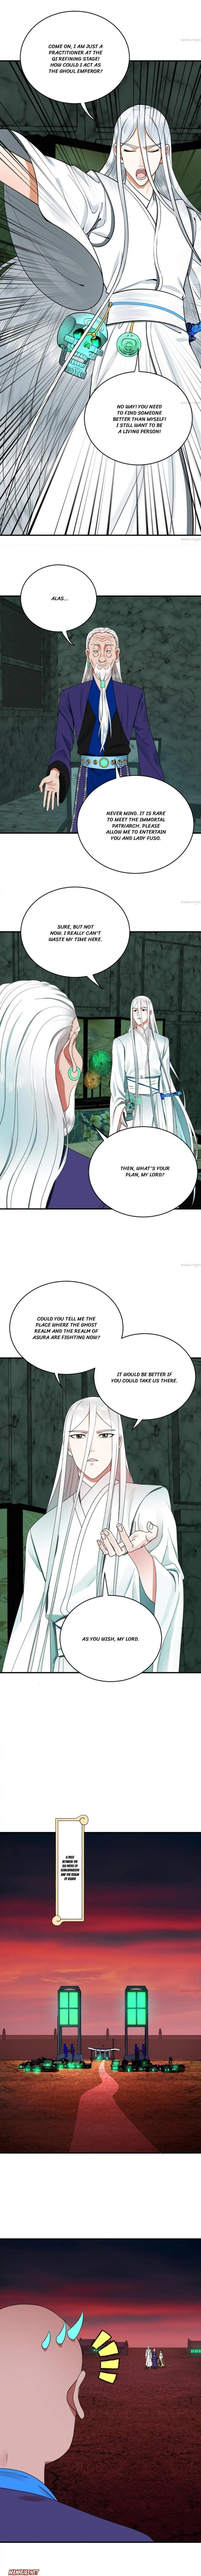 My Three Thousand Years to the Sky Chapter 199 page 7